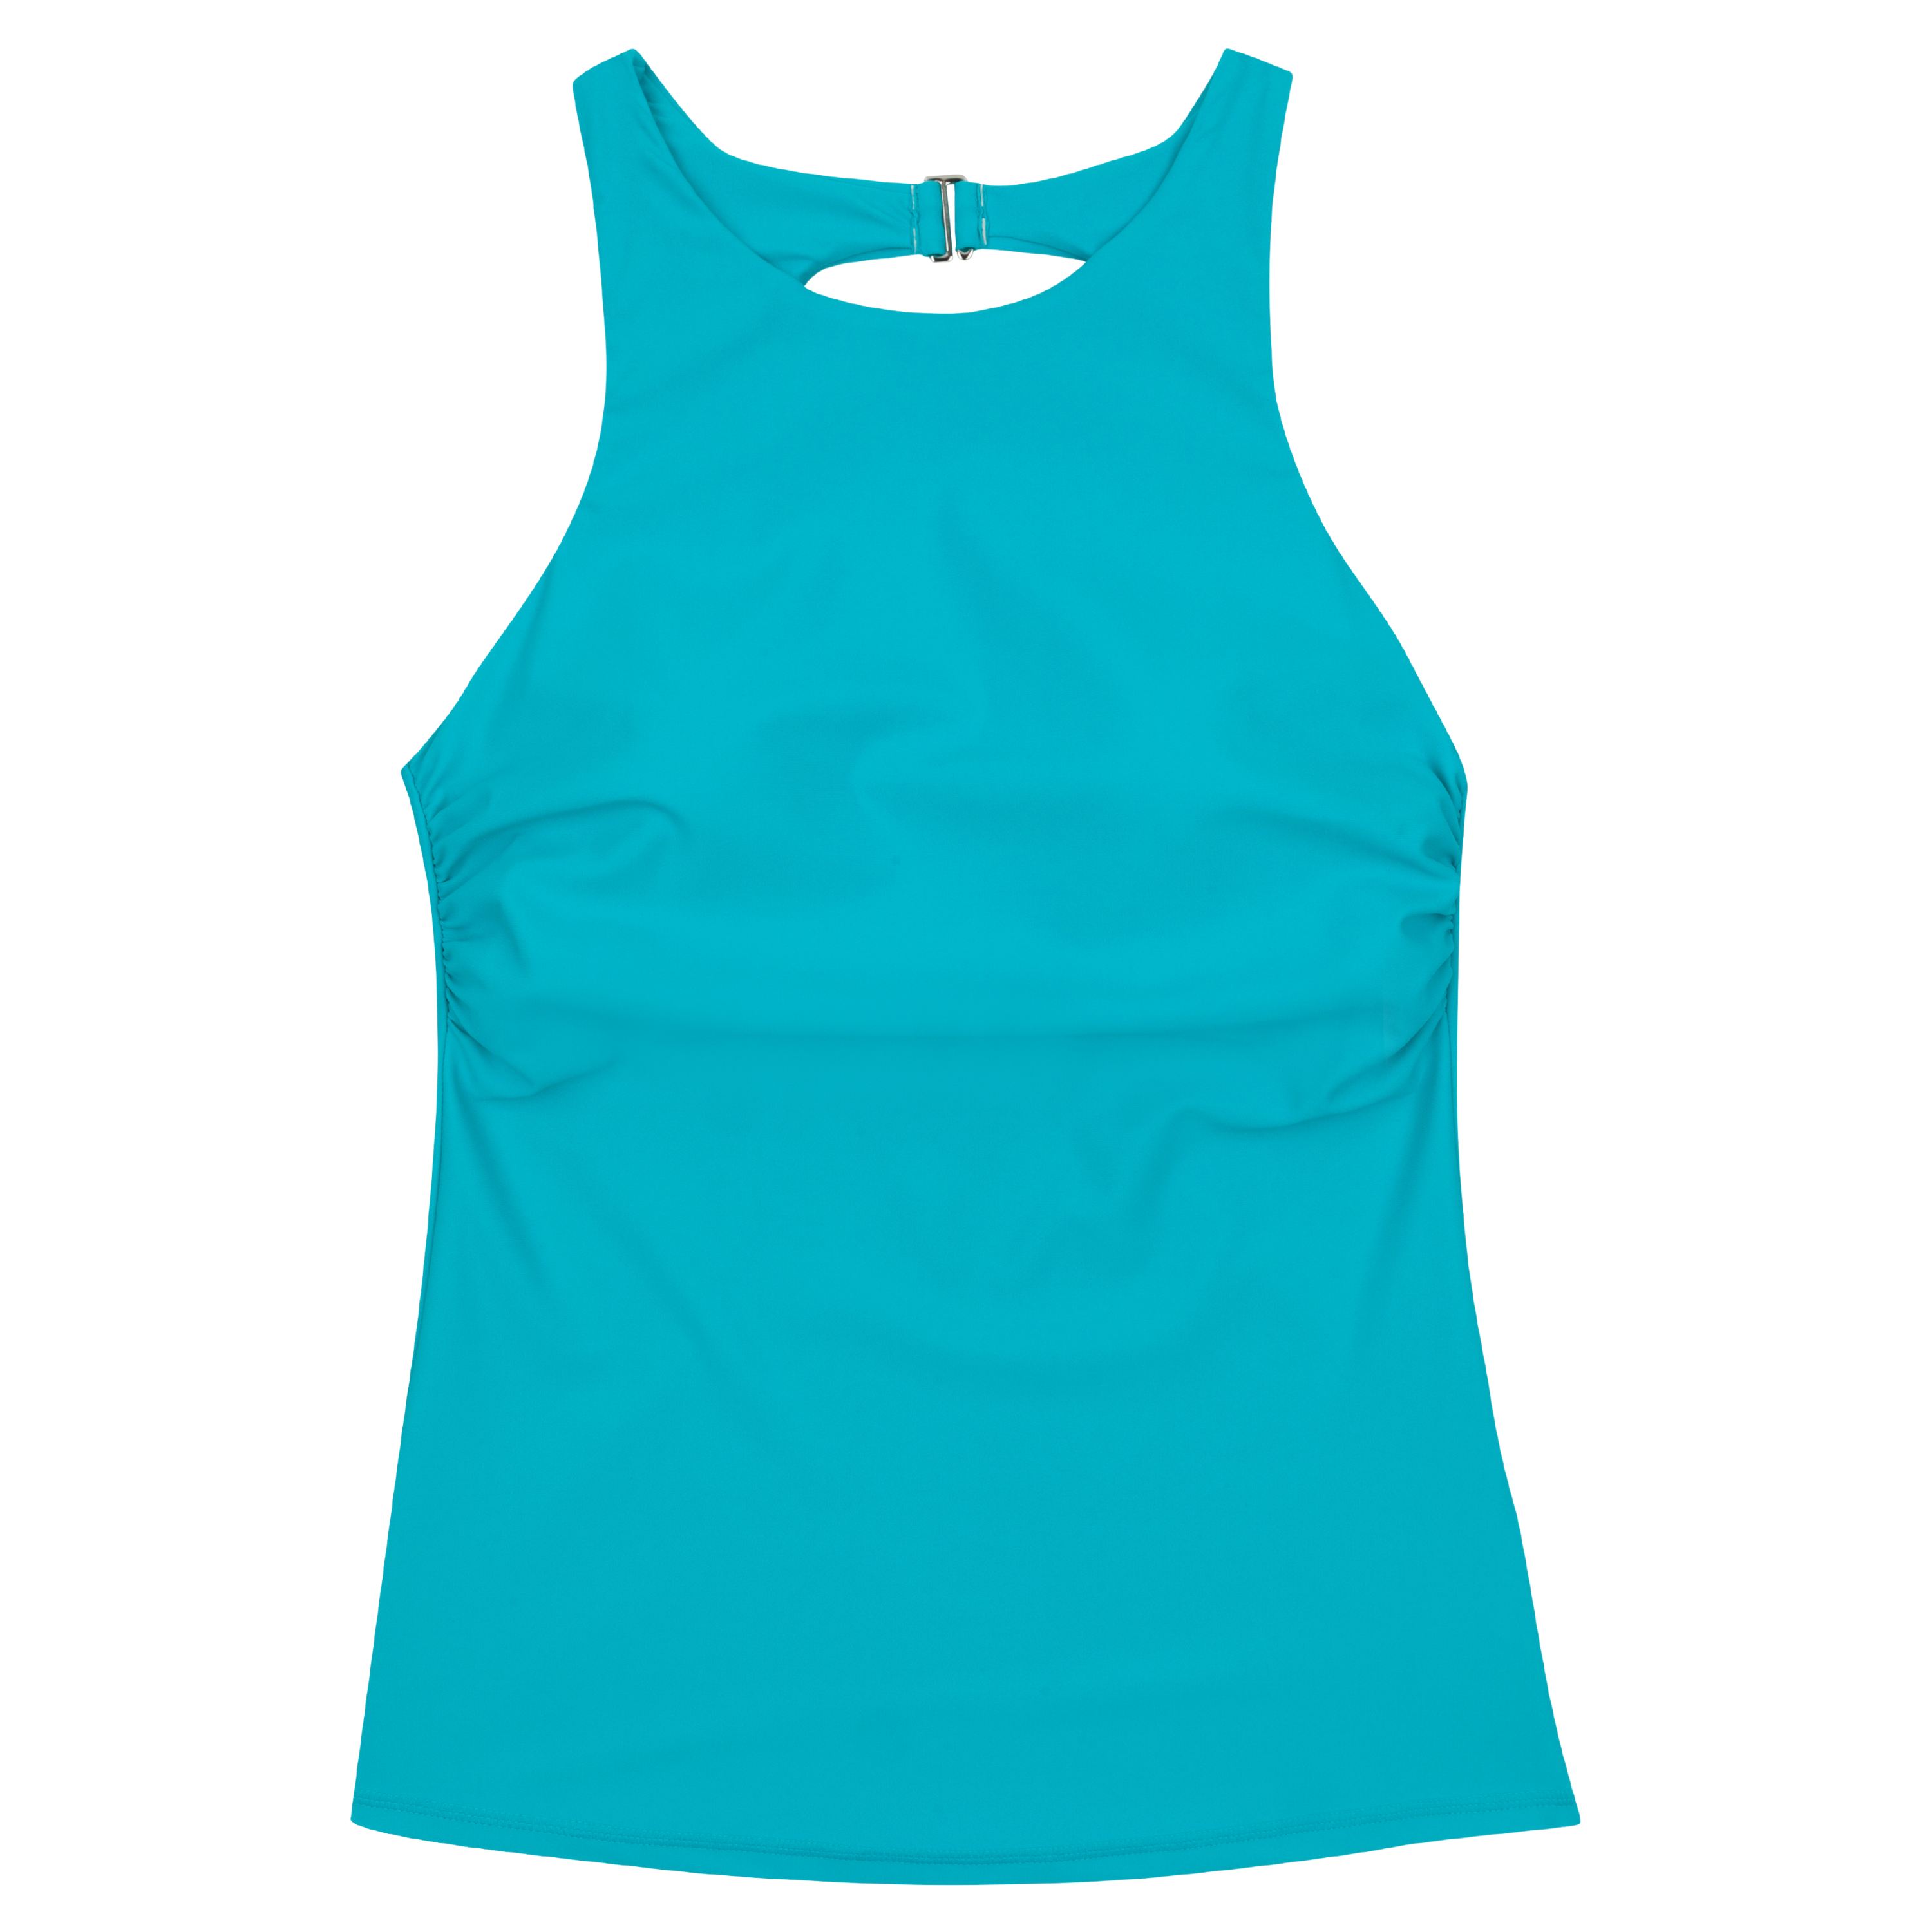 BLUE WAVE High Neck Tankini Top - Turquoise